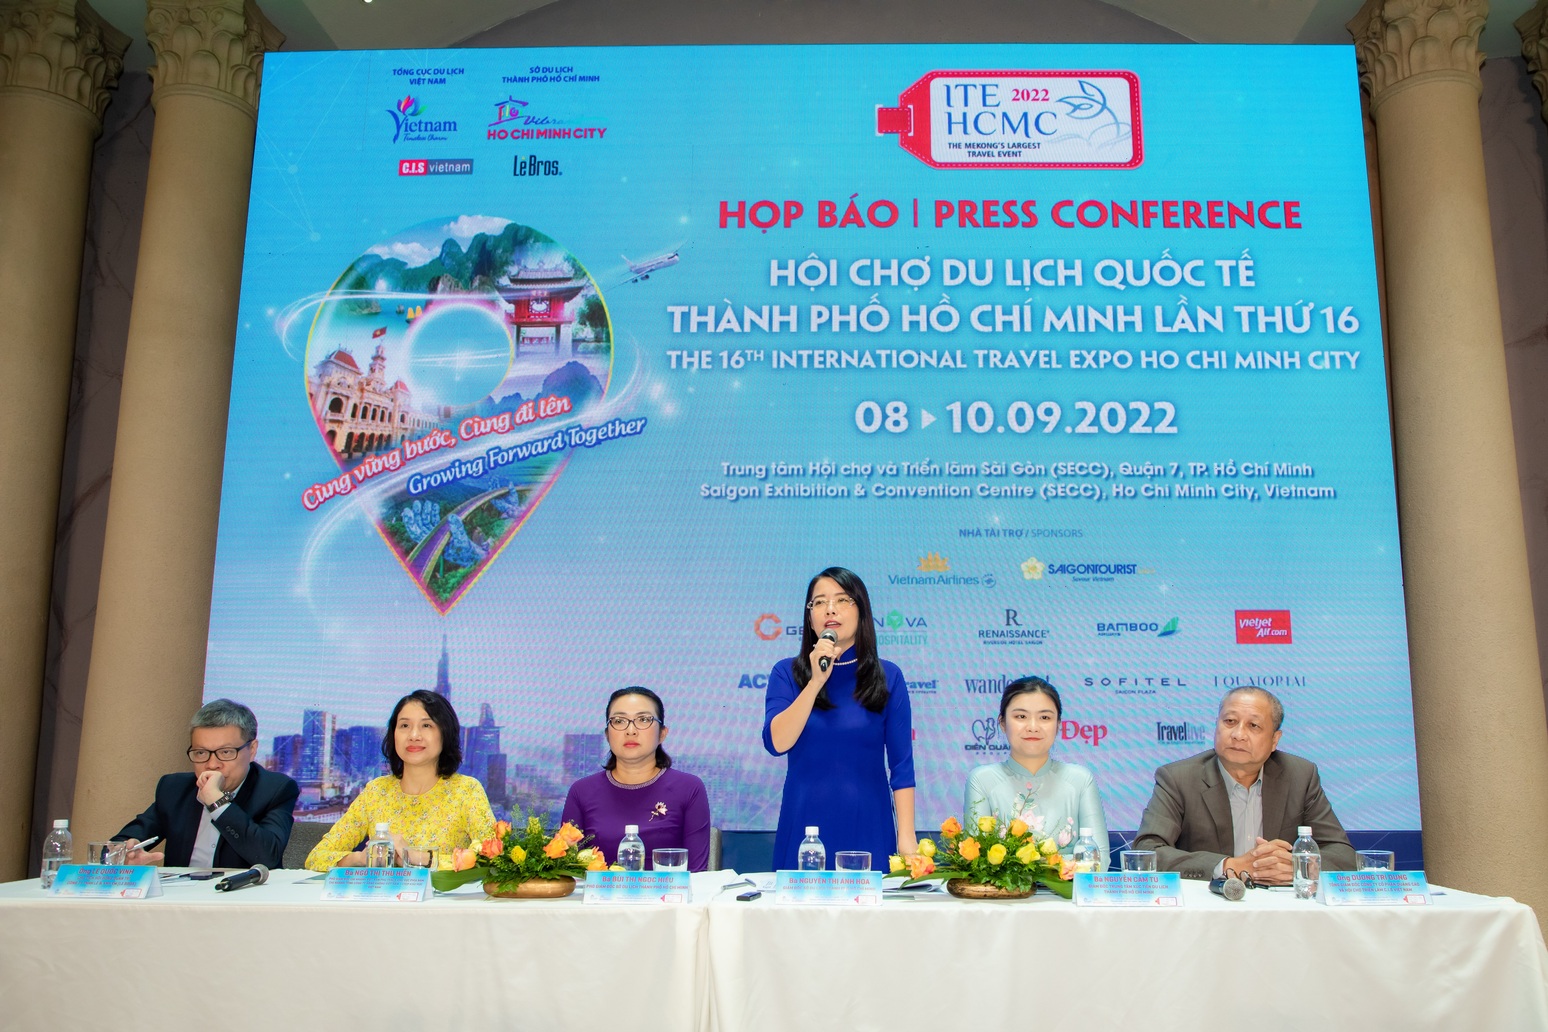 Coundown to the ITE HCMC 2022 - Where Tourism Industry 